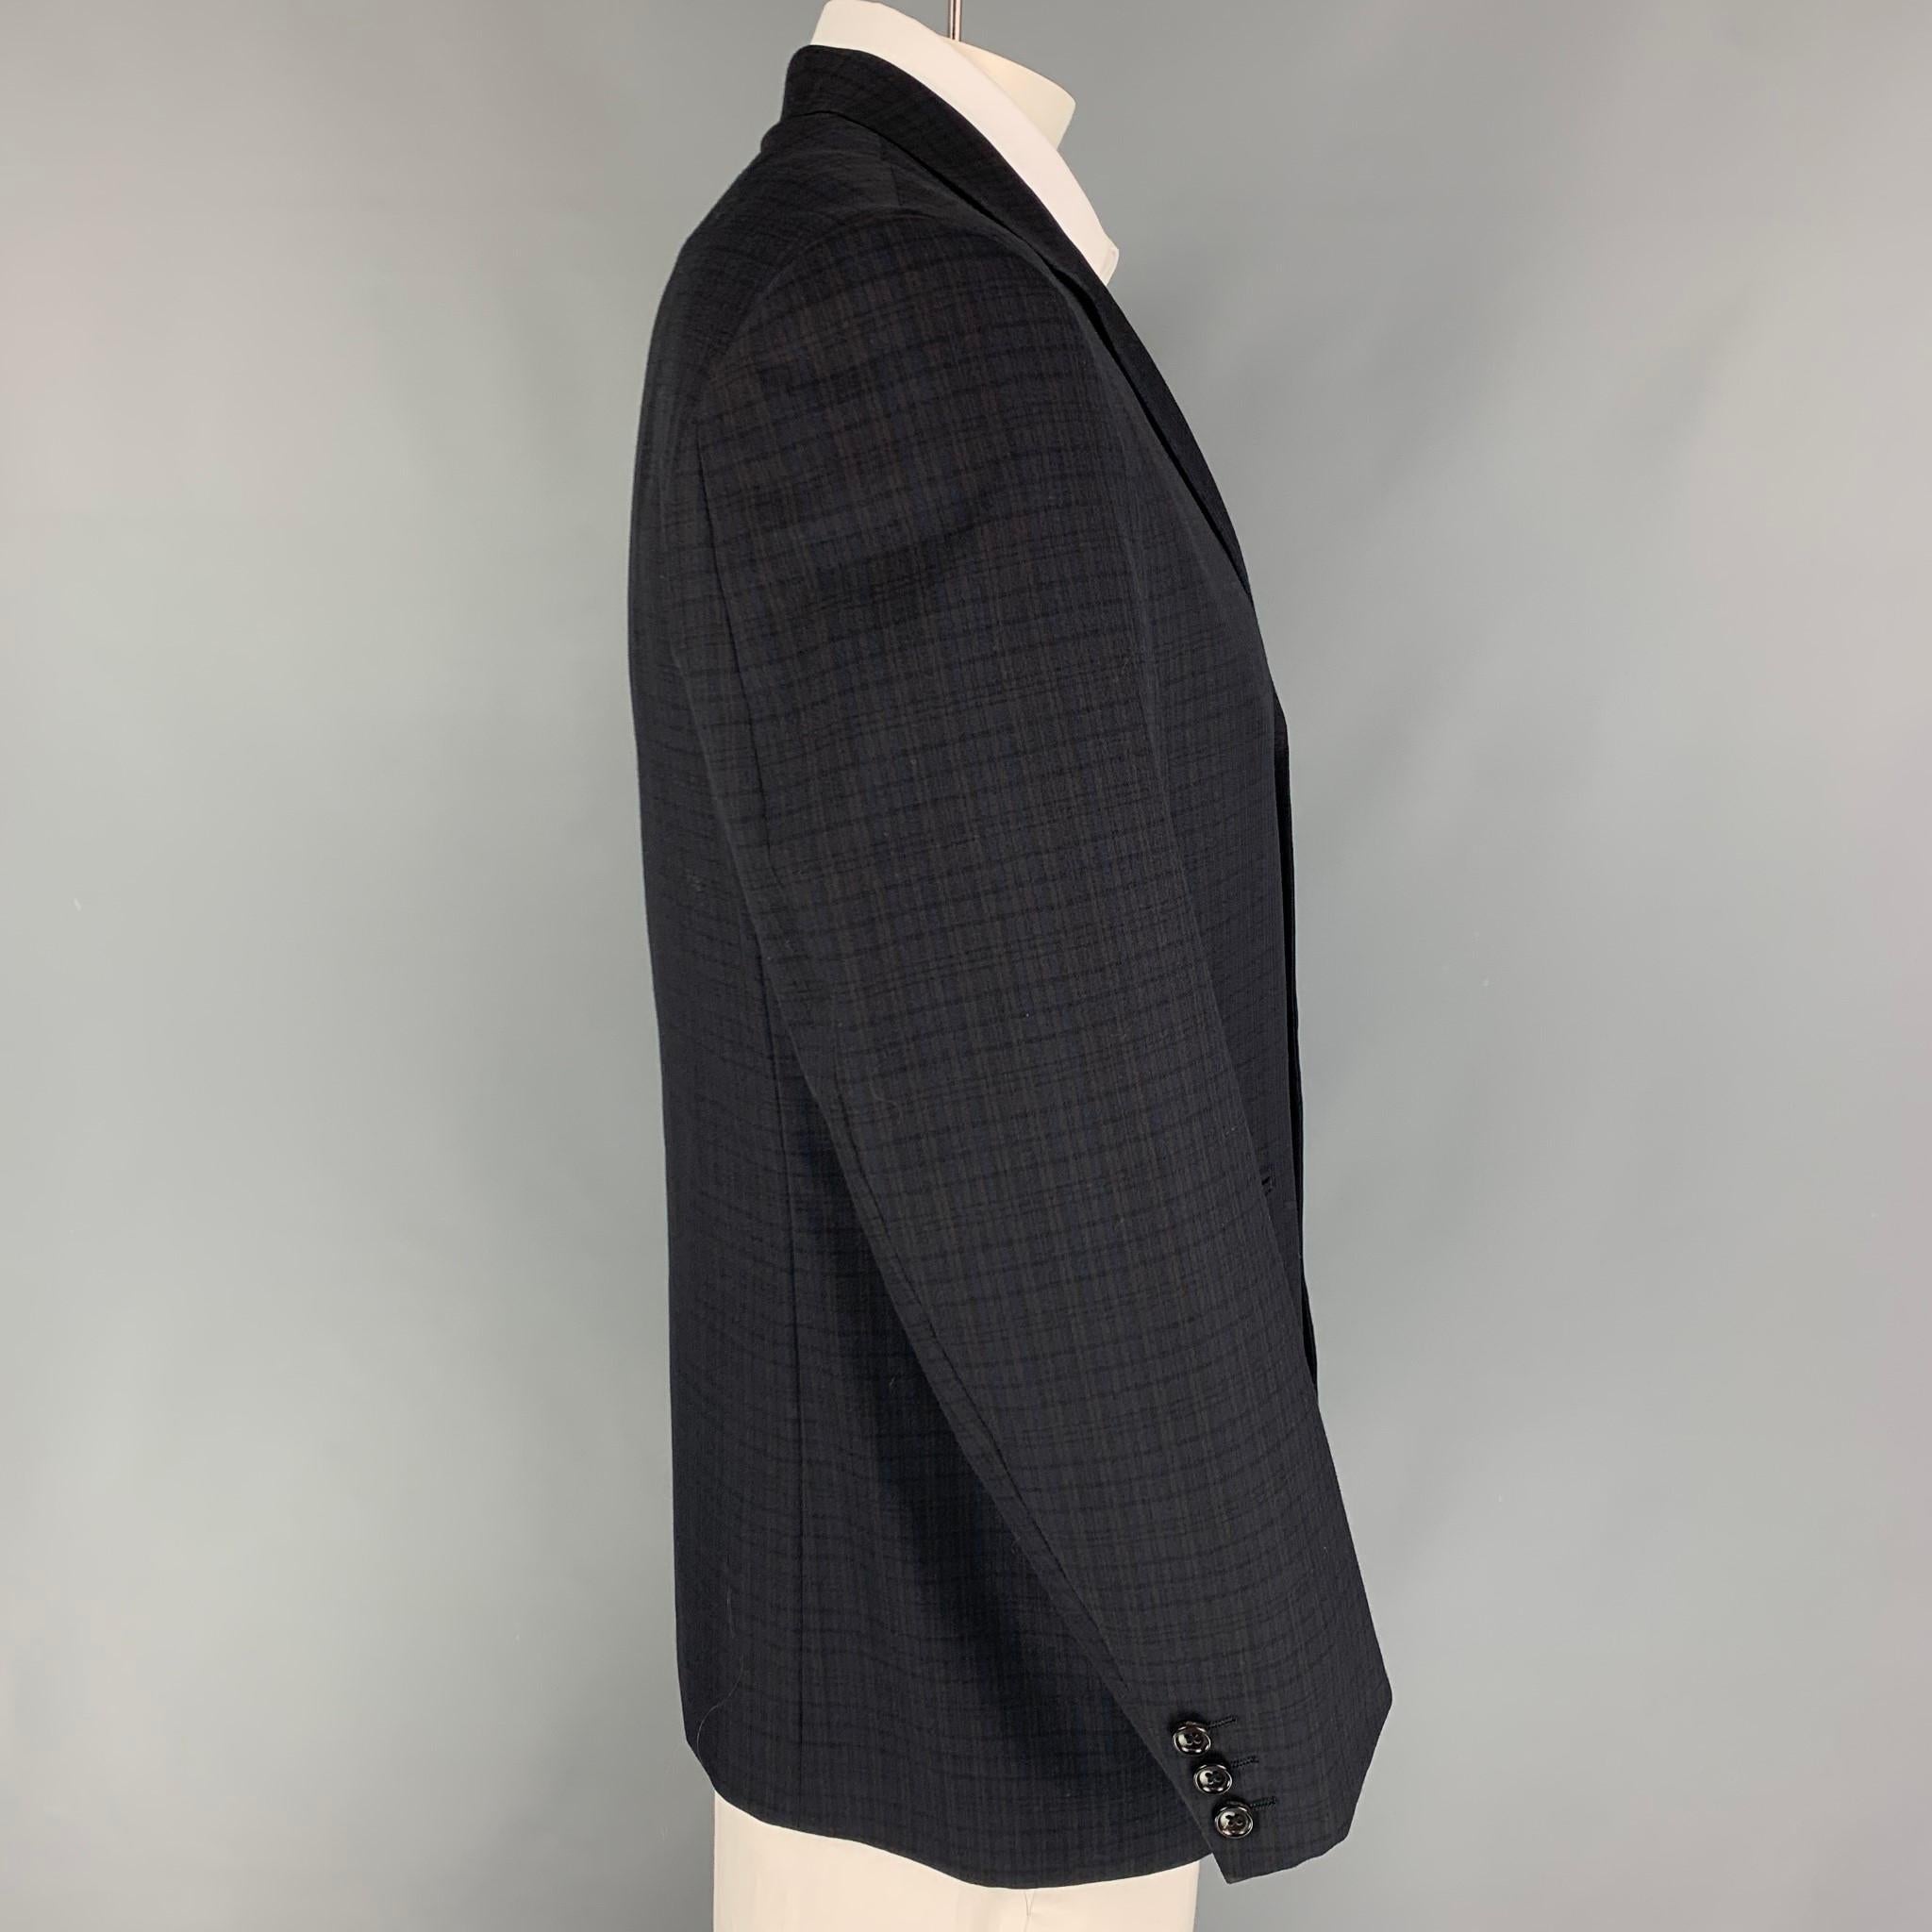 Y'S by YOHJI YAMAMOTO sport coat comes in a black & brown checkered wool / polyester with a full liner featuring a notch lapel, slit pockets, and a three button closure. Made in Italy. 

Very Good Pre-Owned Condition.
Marked: